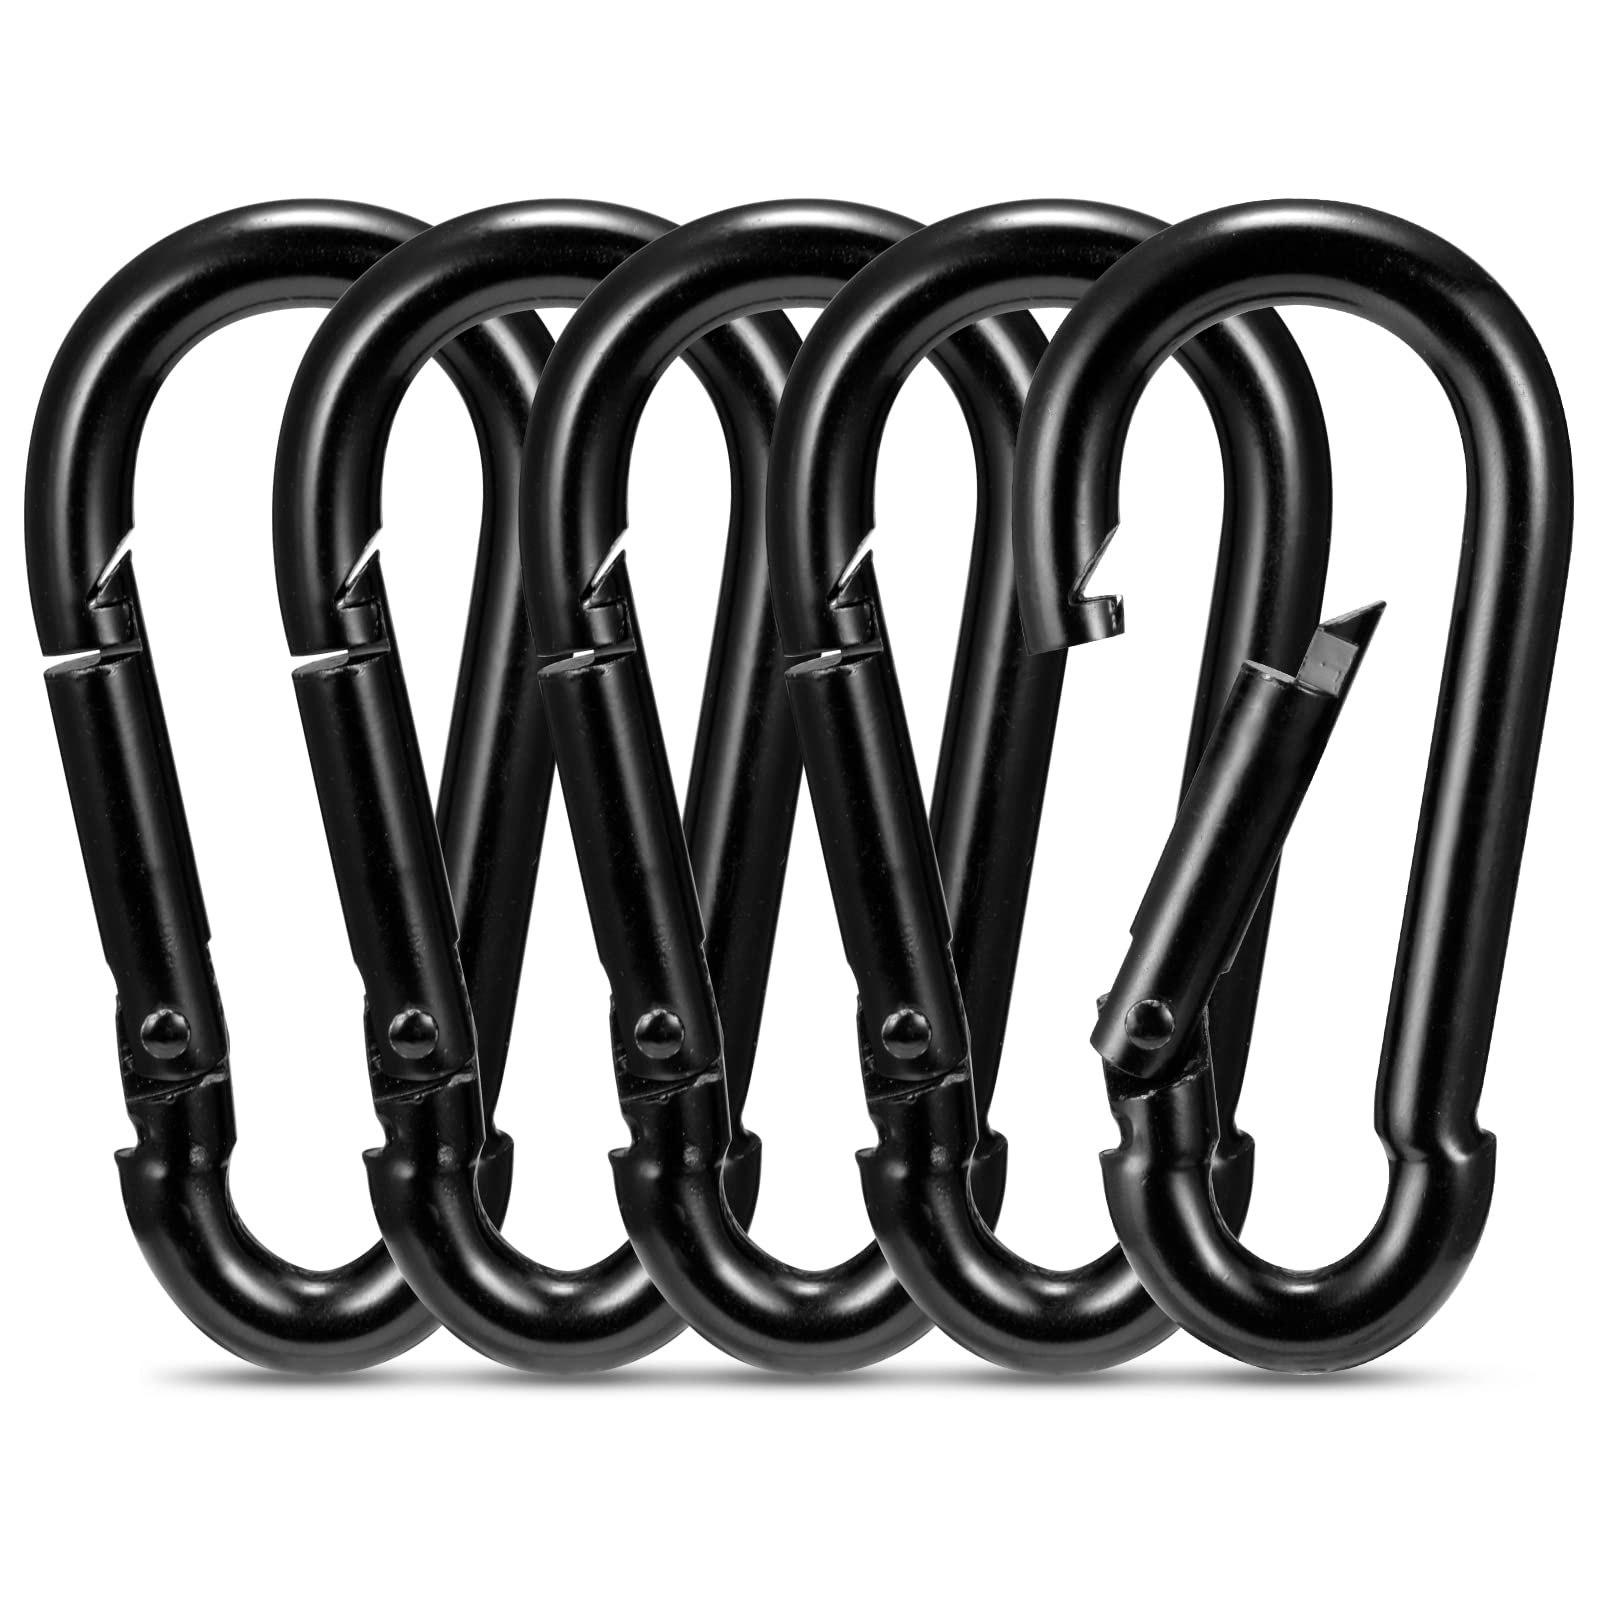 50 Pcs Spring Snap Carabiner, Small Carabiner Clip, M5 x 2 inch Snap Hooks Heavy Duty Carabiner Clips Bulk Hook Keychain for Outdoor Camping, Hiking